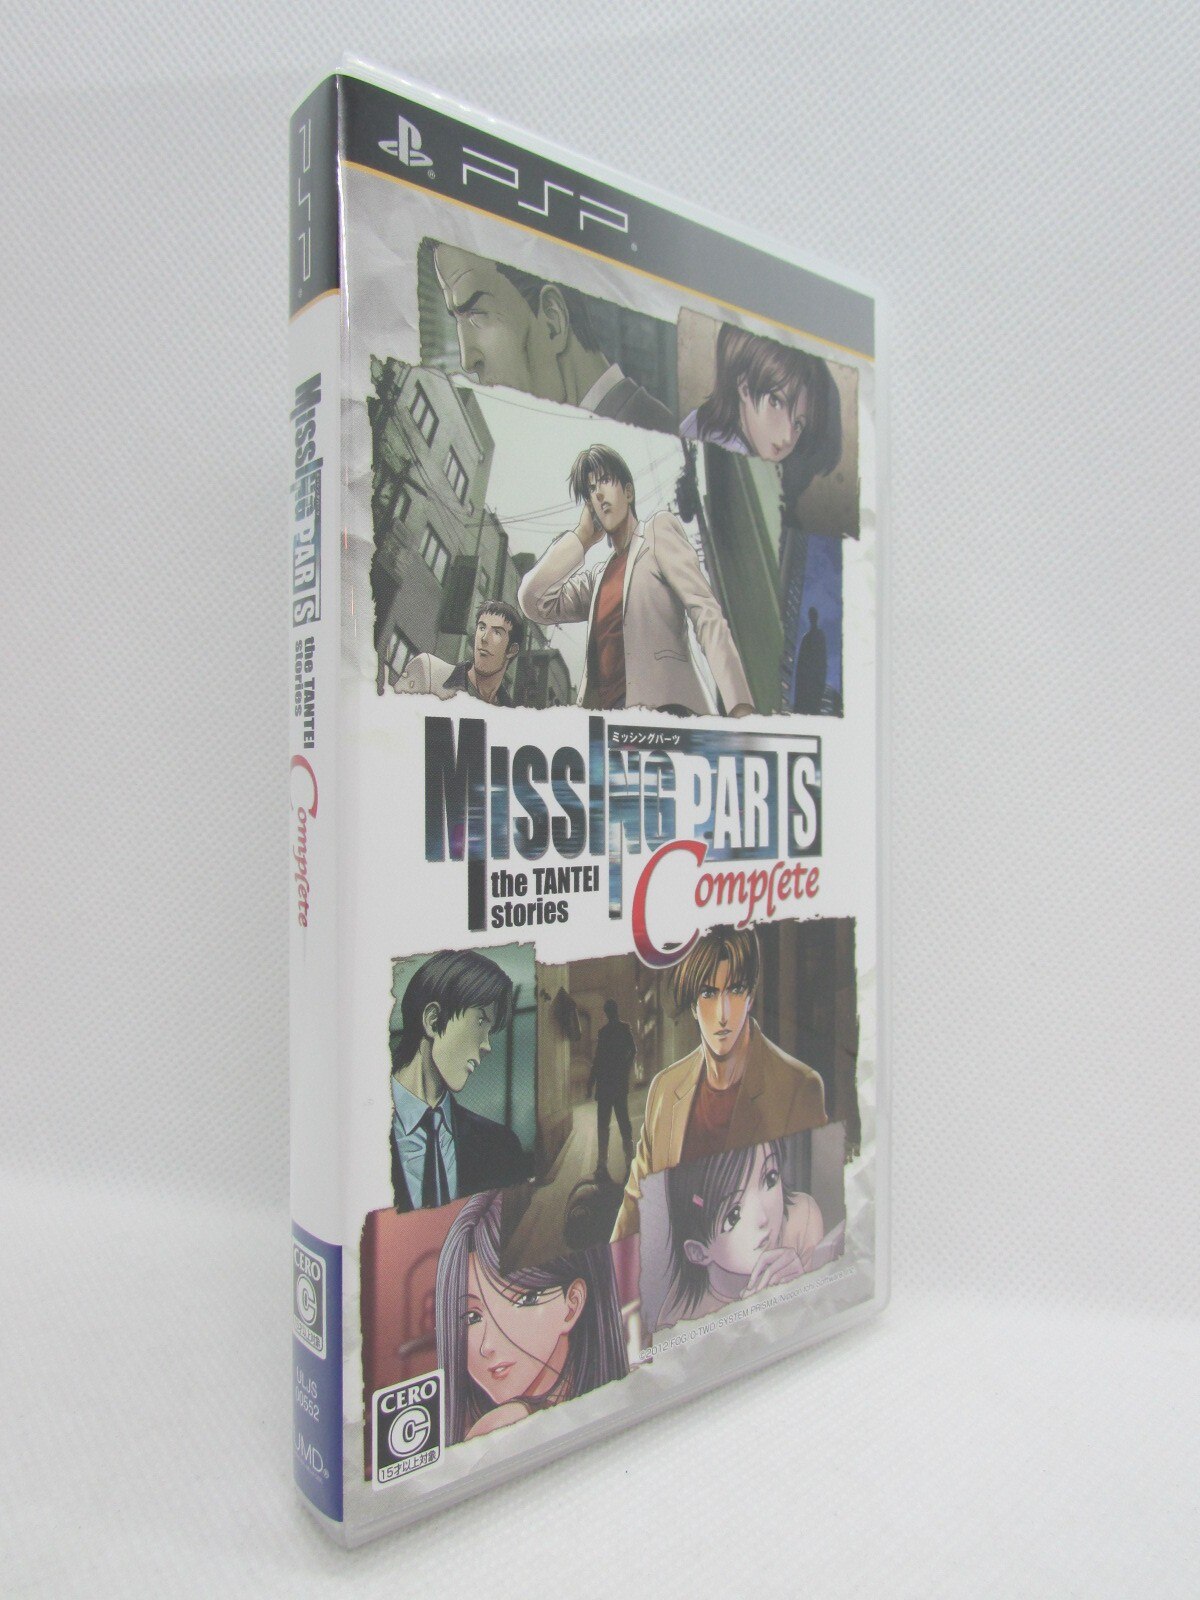 MISSINGPARTS the TANTEI stories Complete PSP